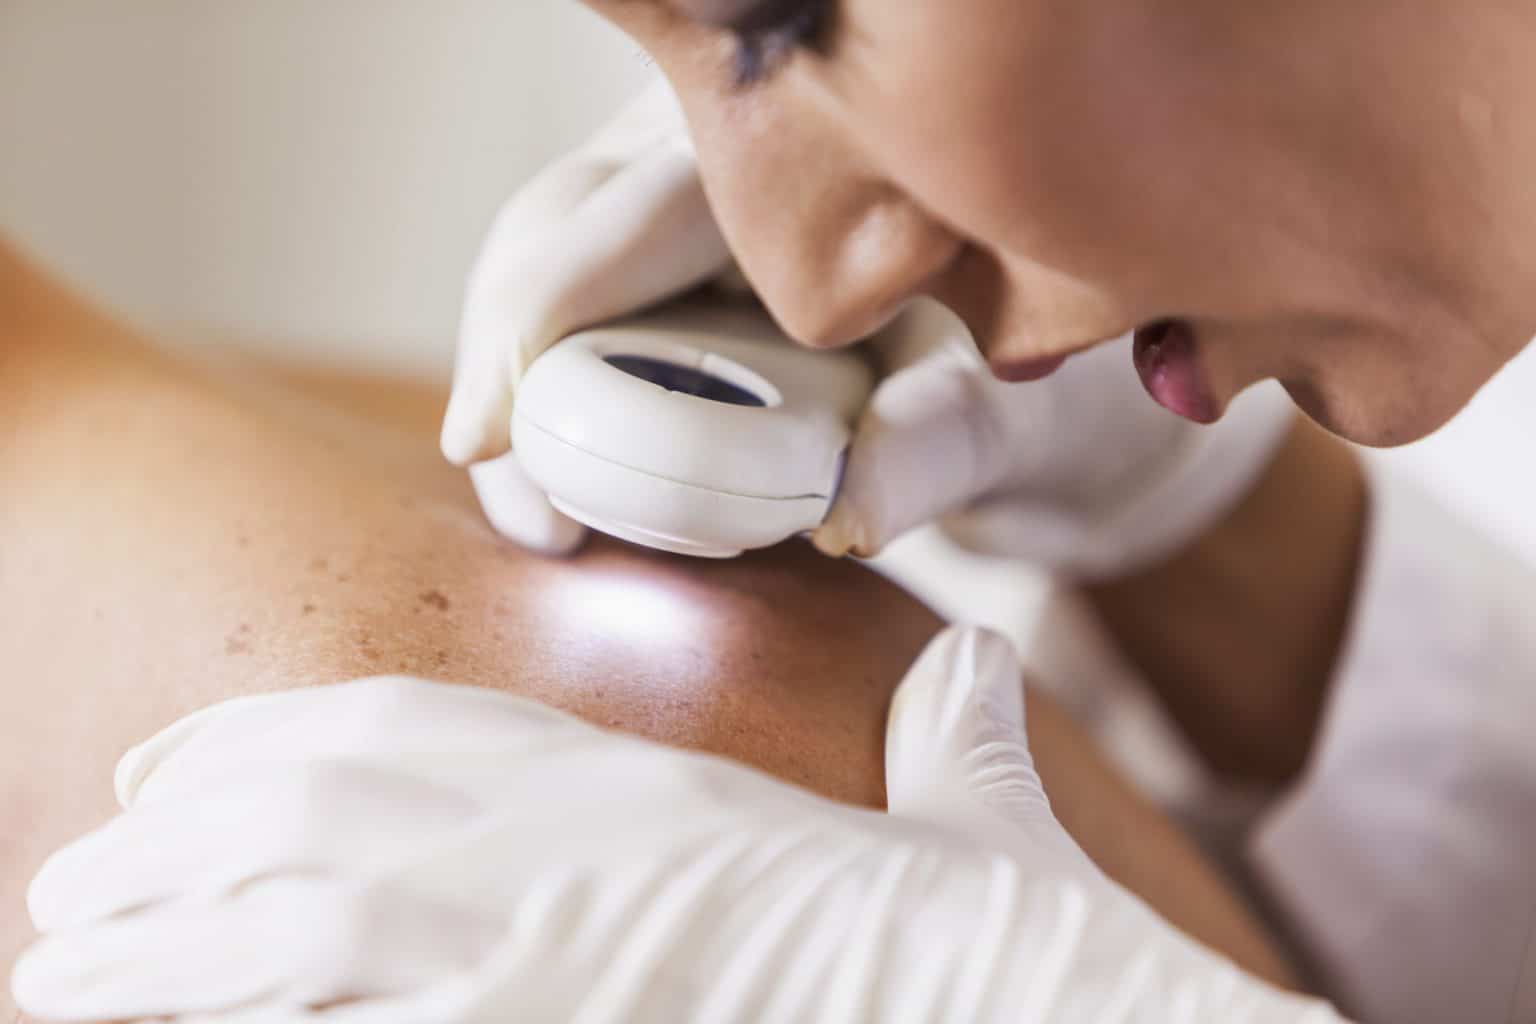 Physician looking at patient's skin for signs of skin cancer